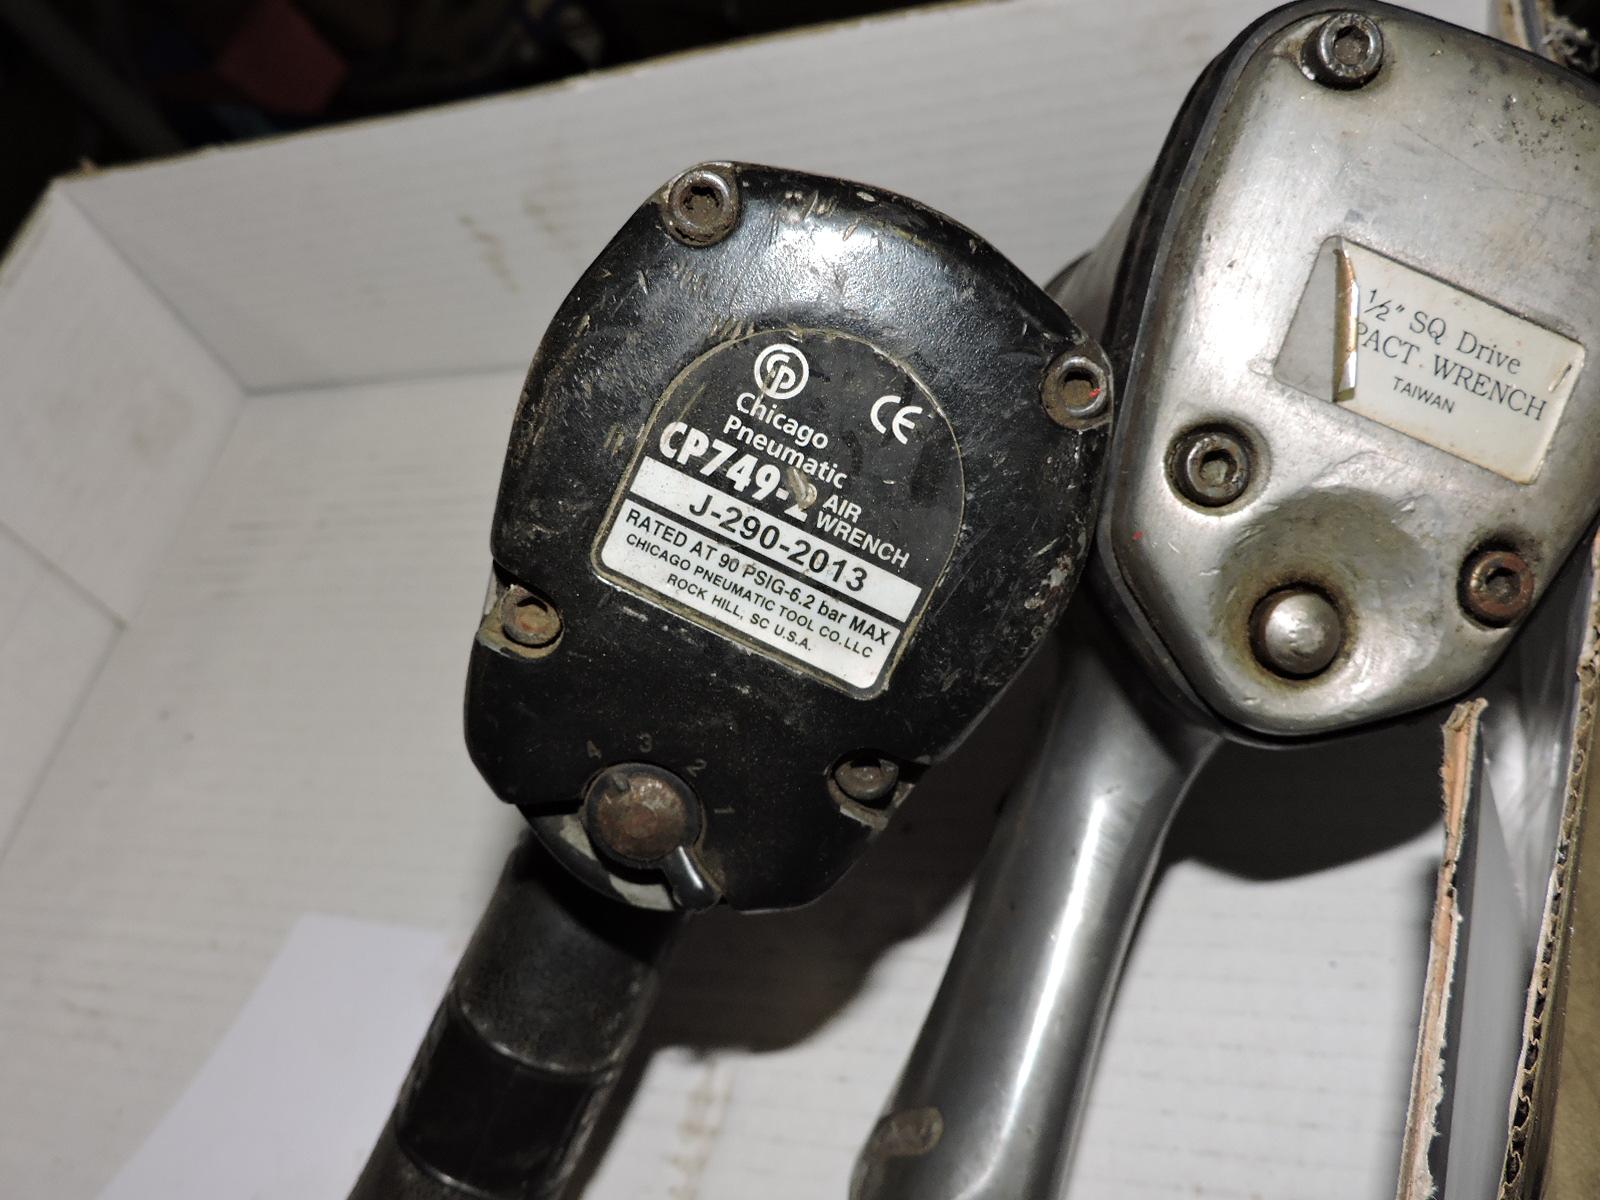 Pair of Pneumatic Impact Wrenches -- One is Chicago Pneumatic / Other Unknown